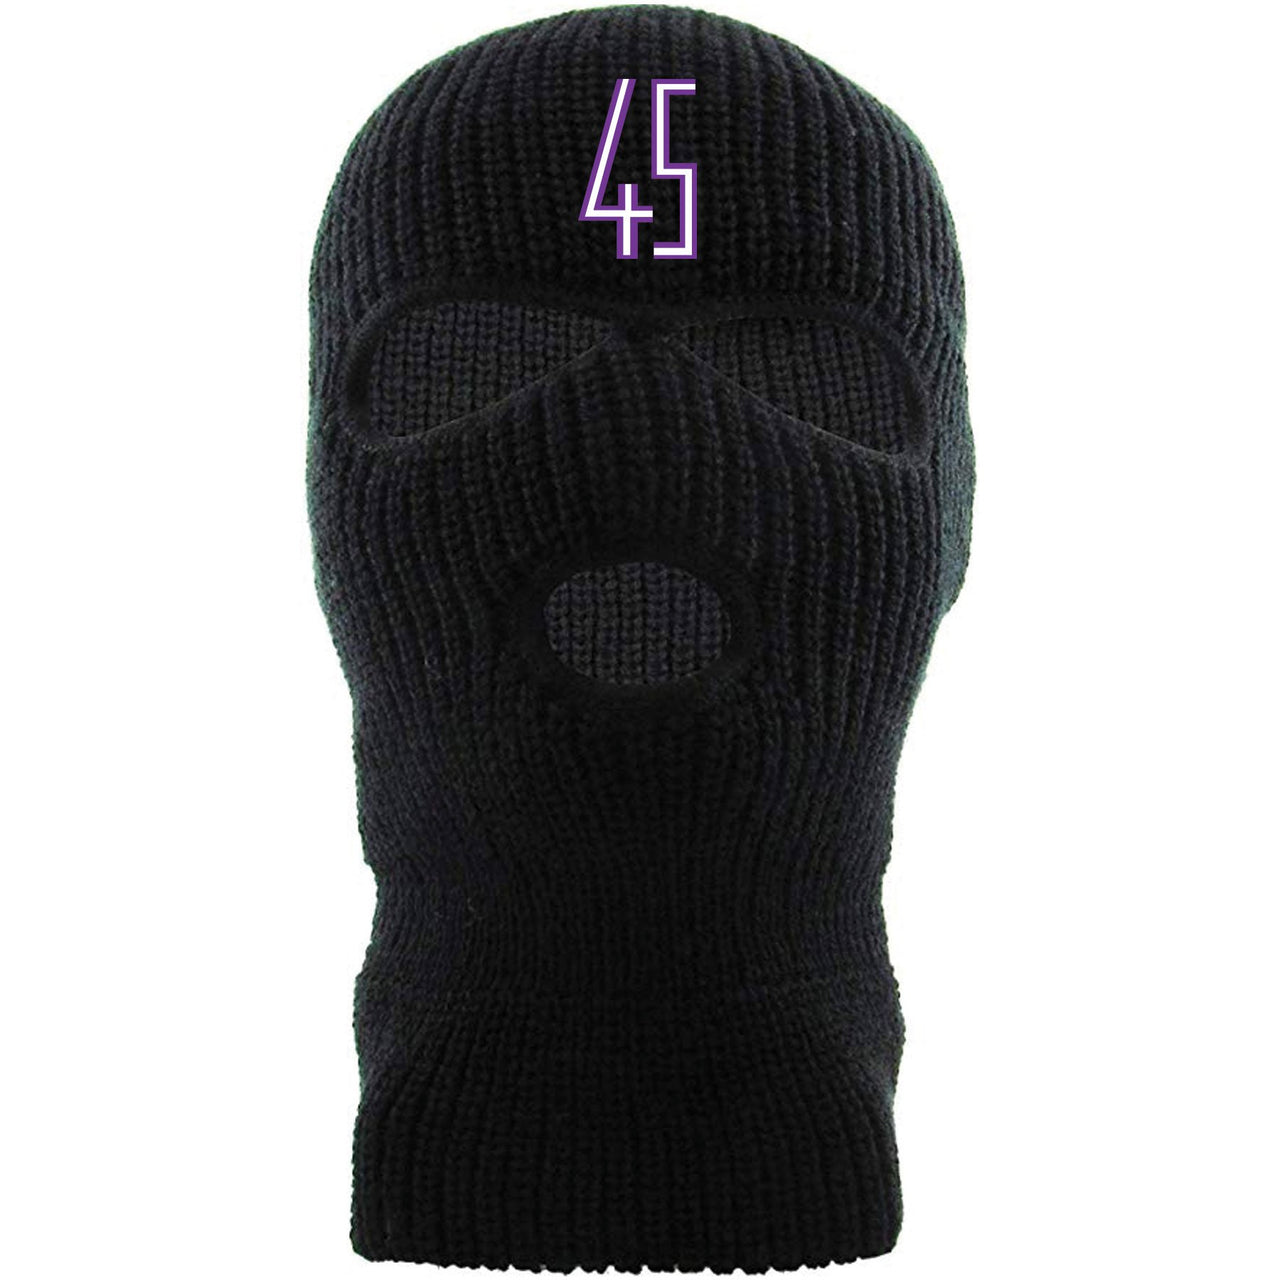 Embroidered on the forehead of the Jordan 11 Concord 45s sneaker matching black ski mask is the 45 logo in white and purple